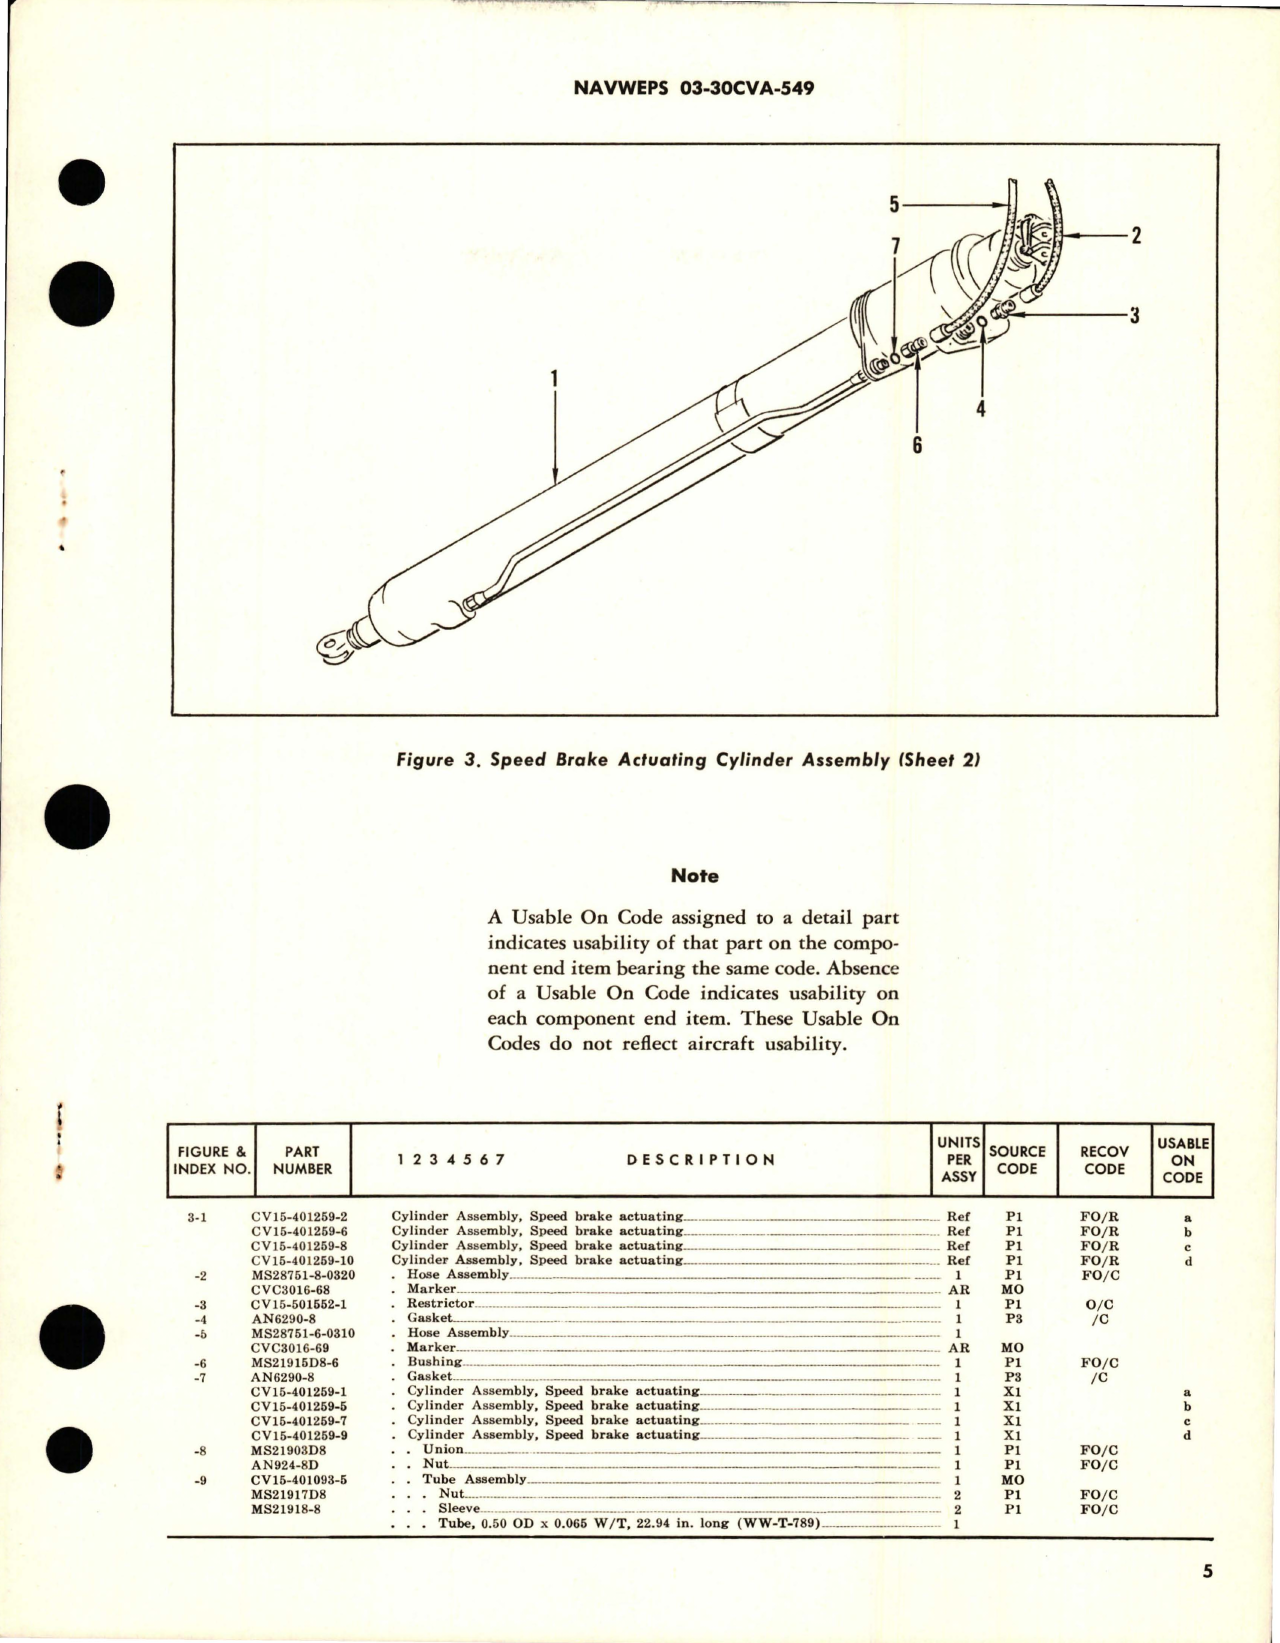 Sample page 5 from AirCorps Library document: Overhaul Instructions with Parts for Speed Brake Actuating Cylinder Assembly